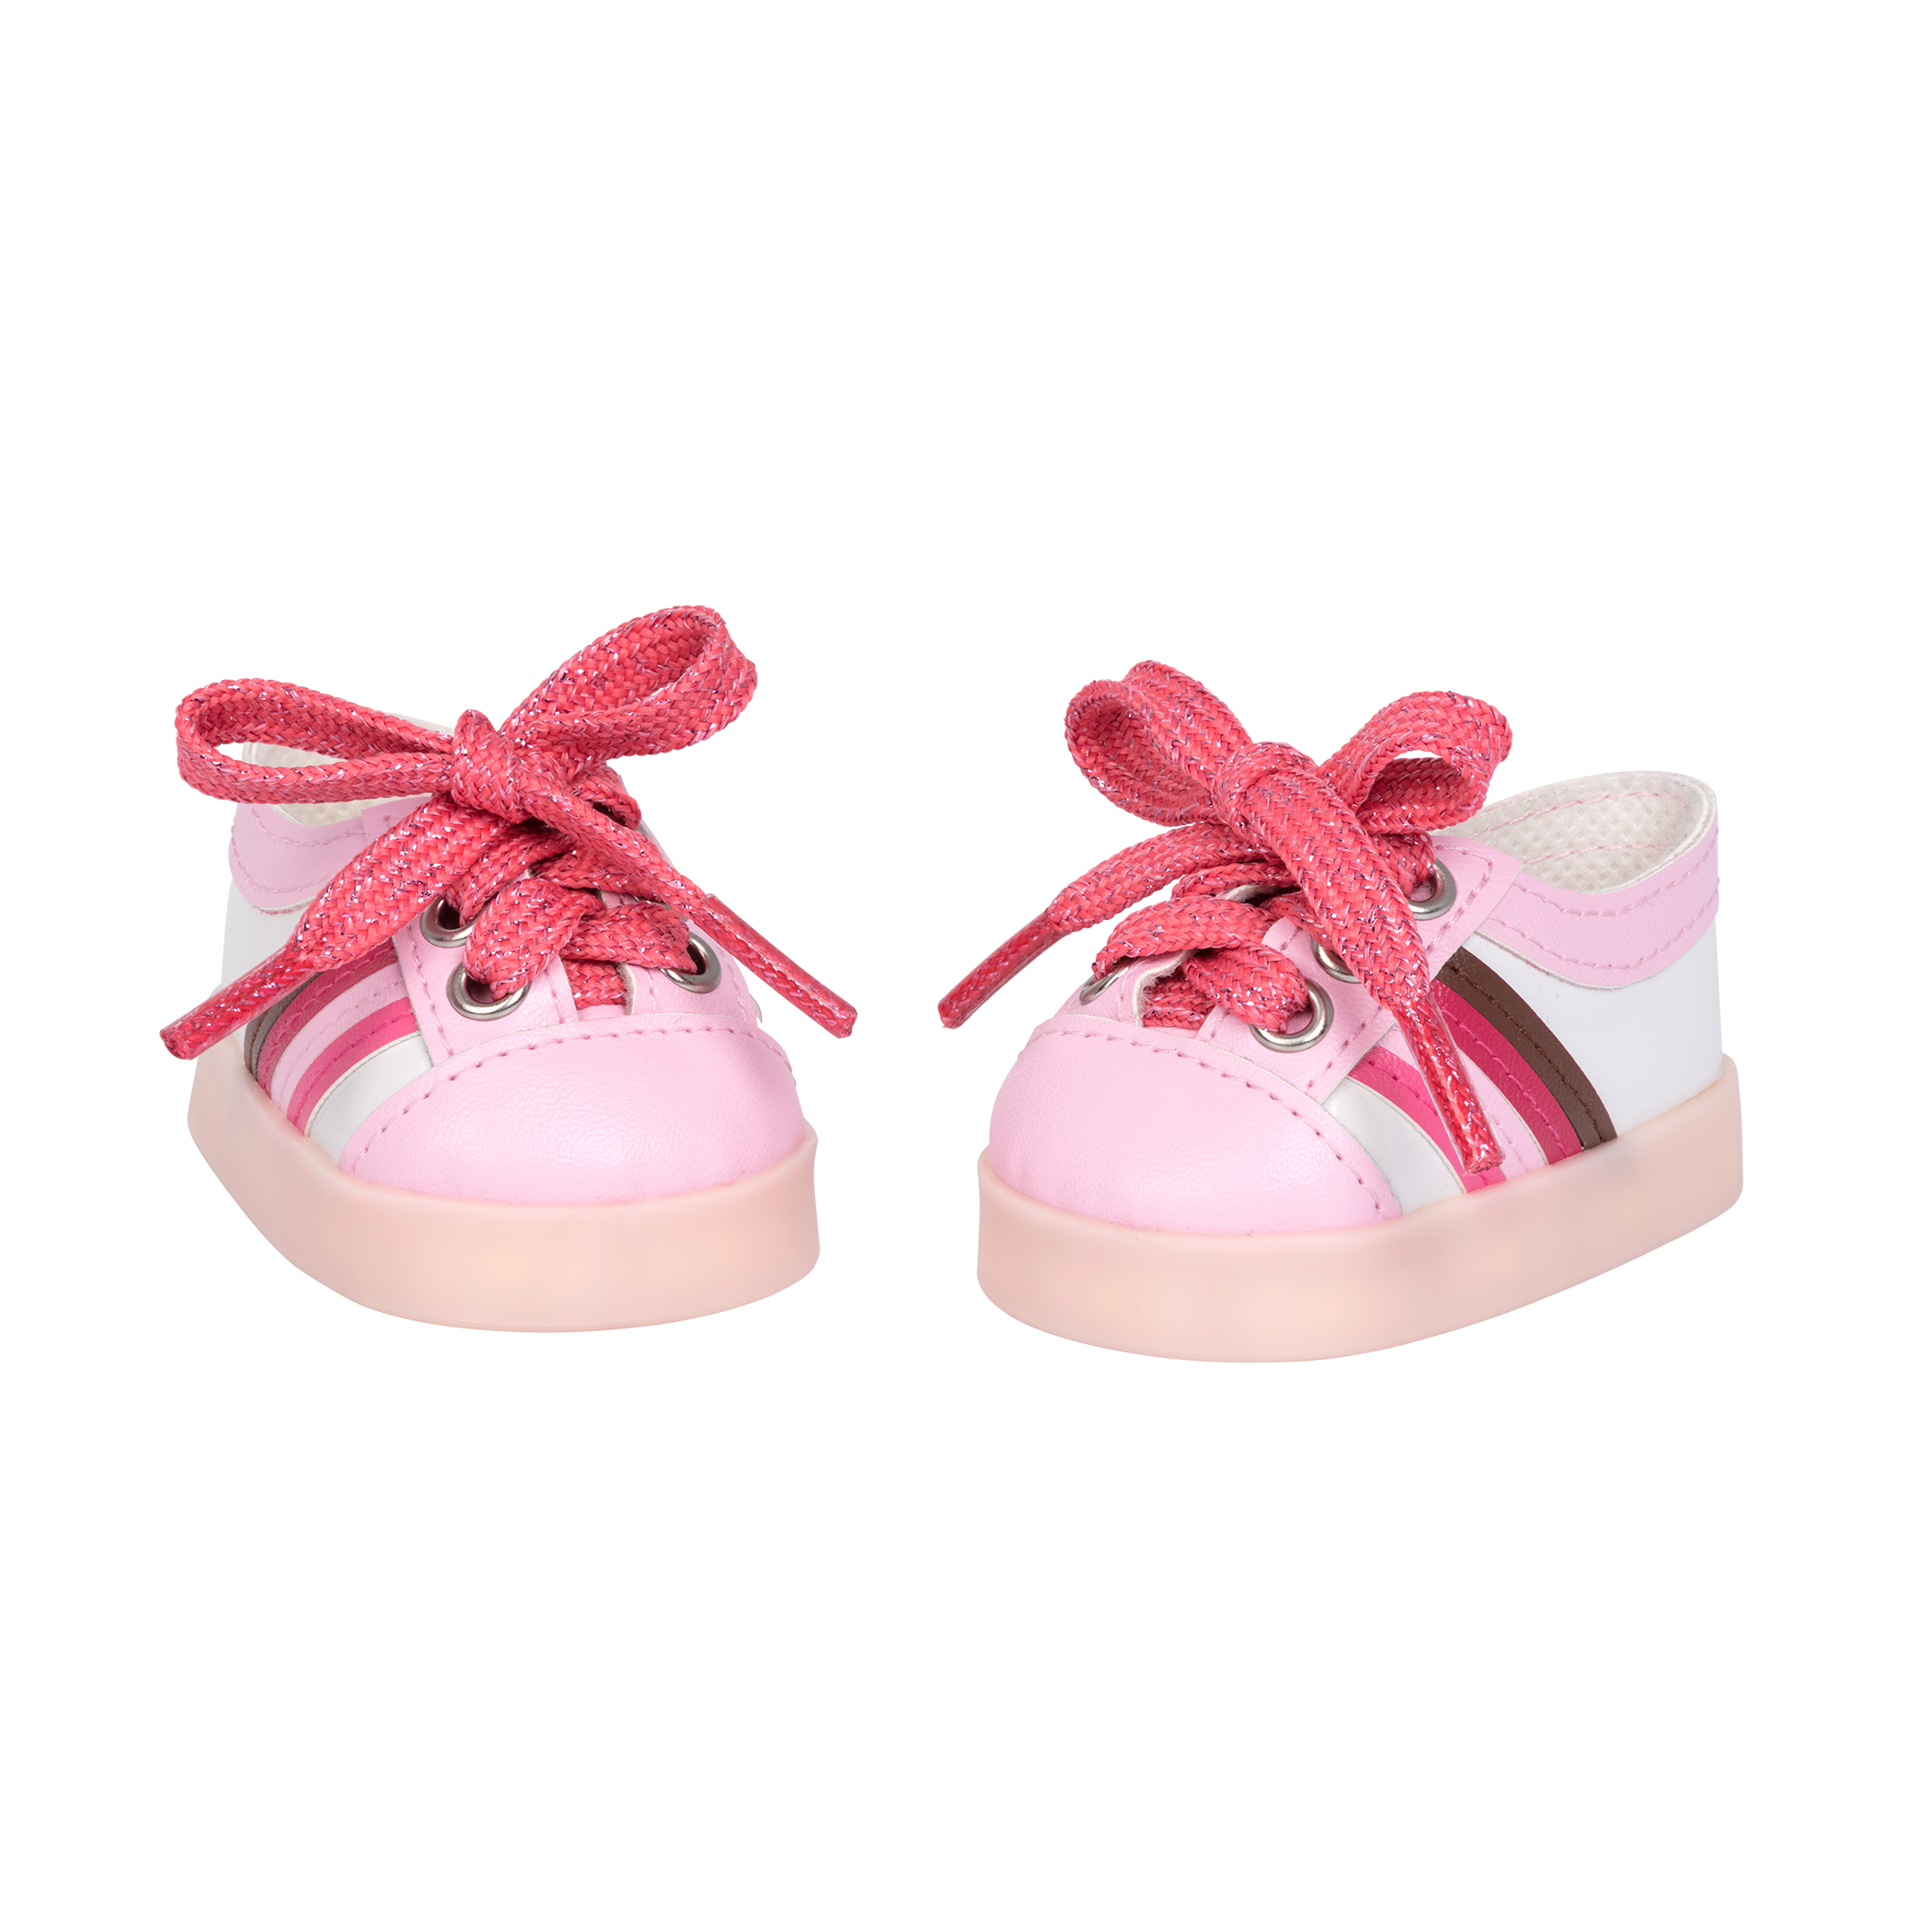 Rainbow Delight Light-Up Shoes for 18-inch Dolls 